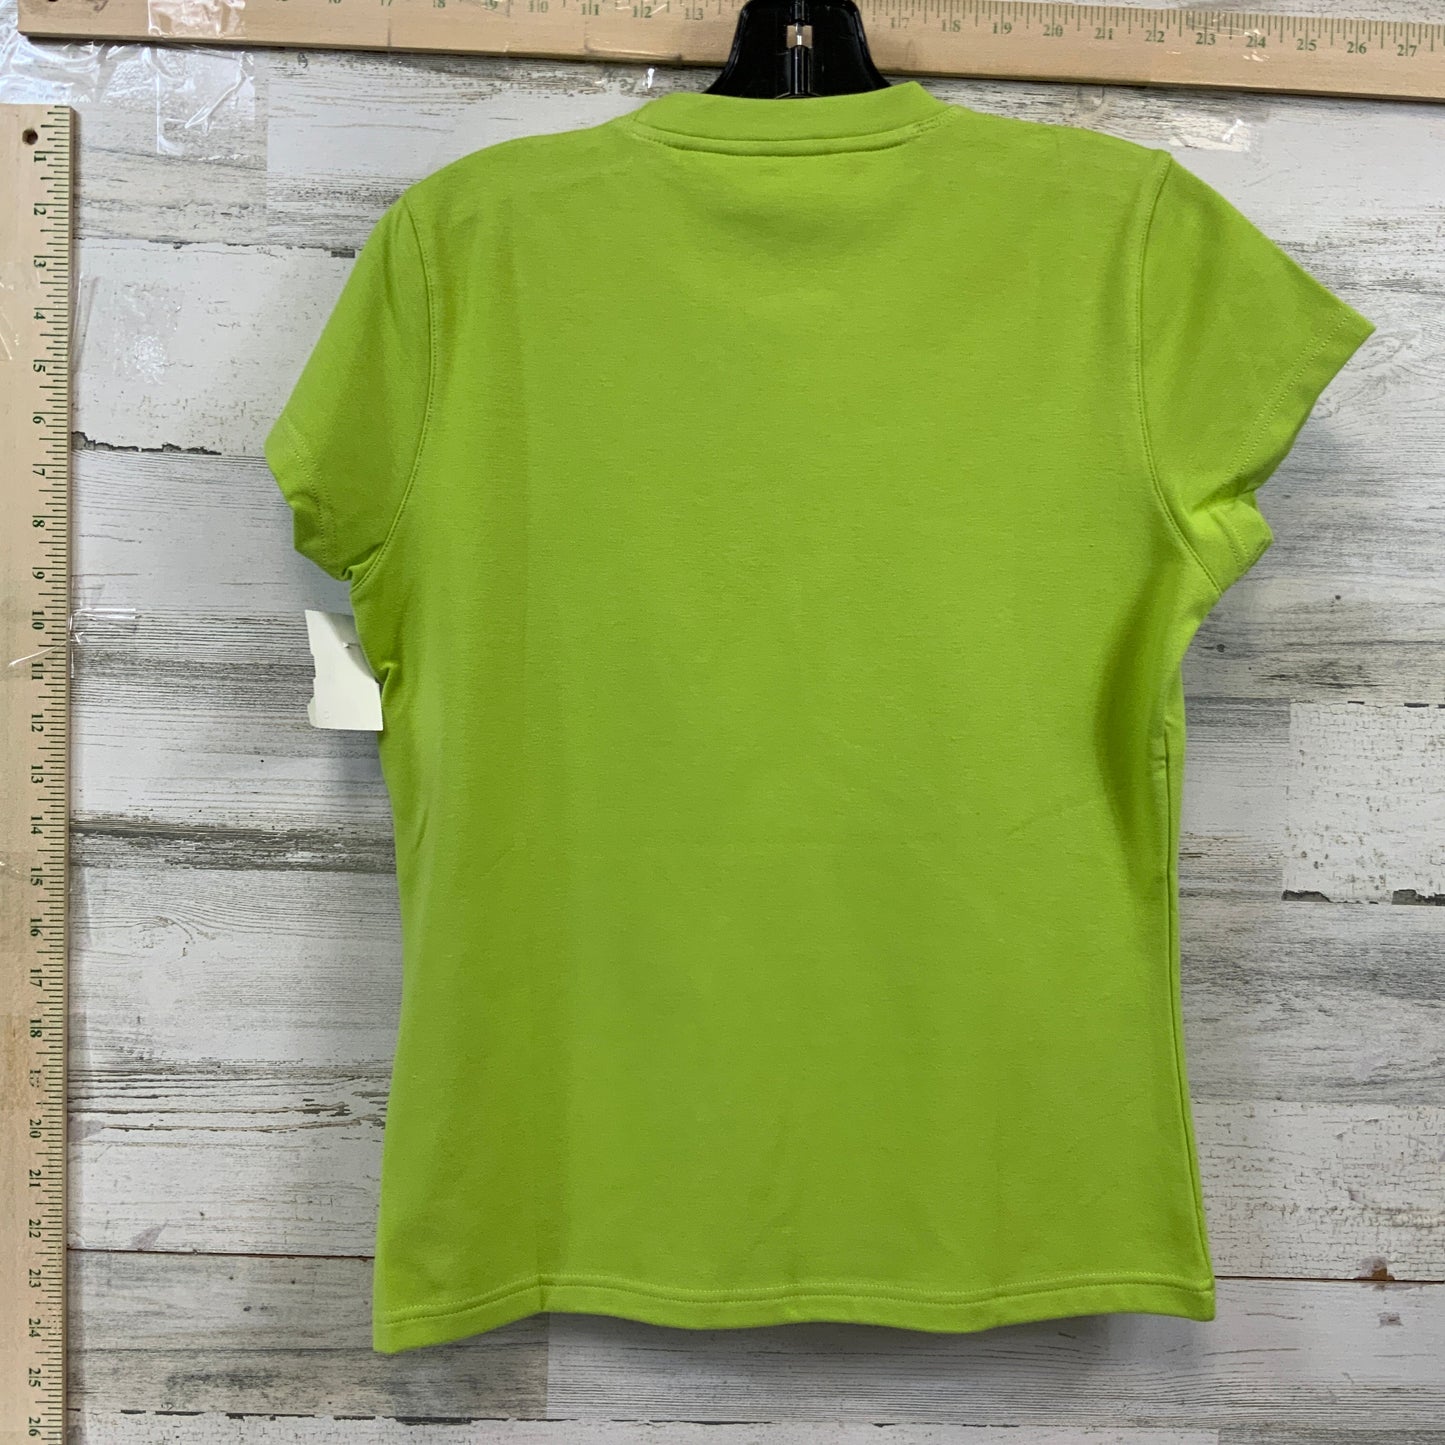 Athletic Top Short Sleeve By Izod  Size: M